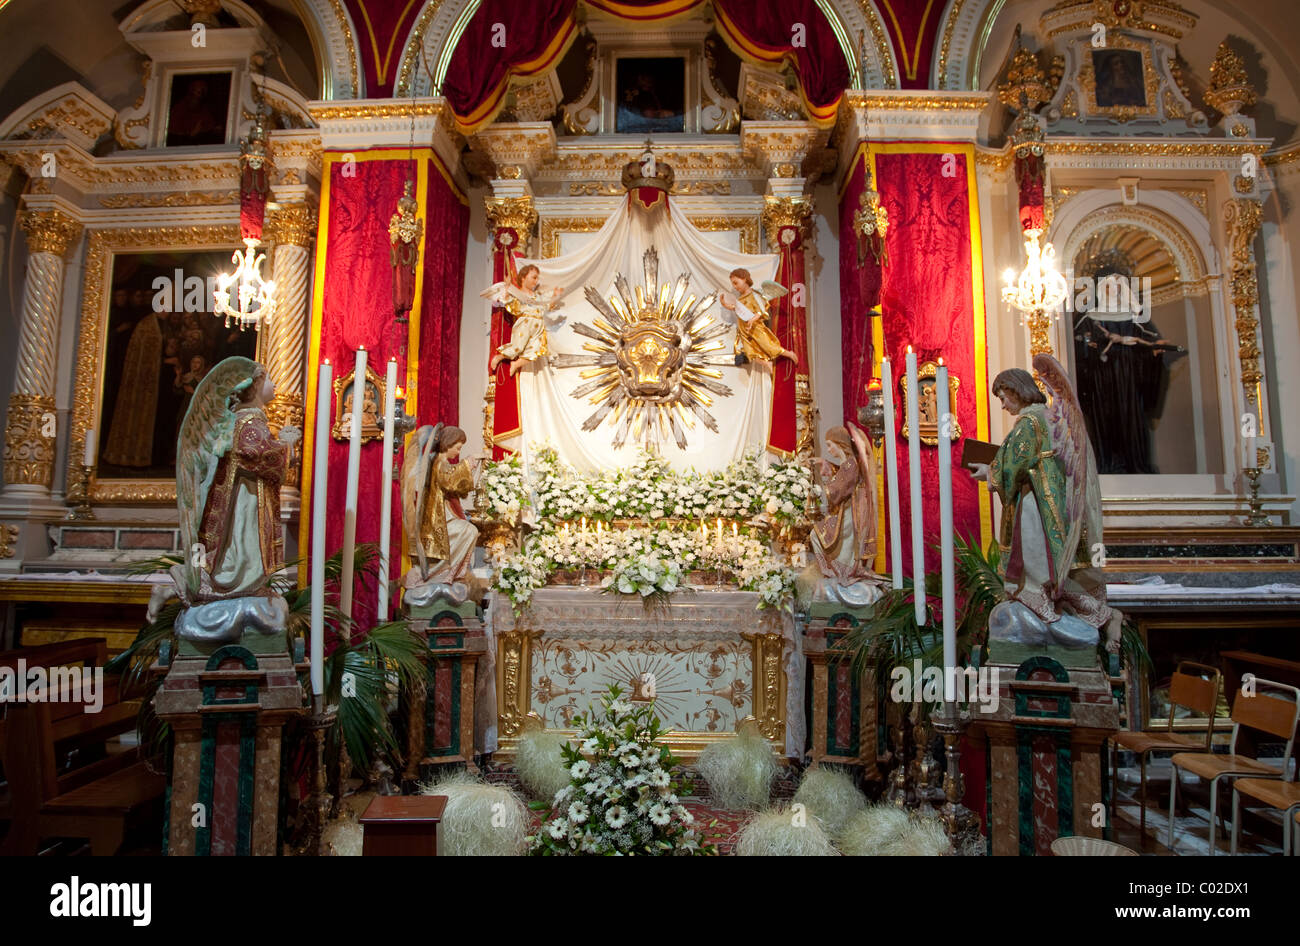 Flowers and other objects make up the sepulchre exhibition that is set up in churches in Malta on eve of Good Friday. Stock Photo